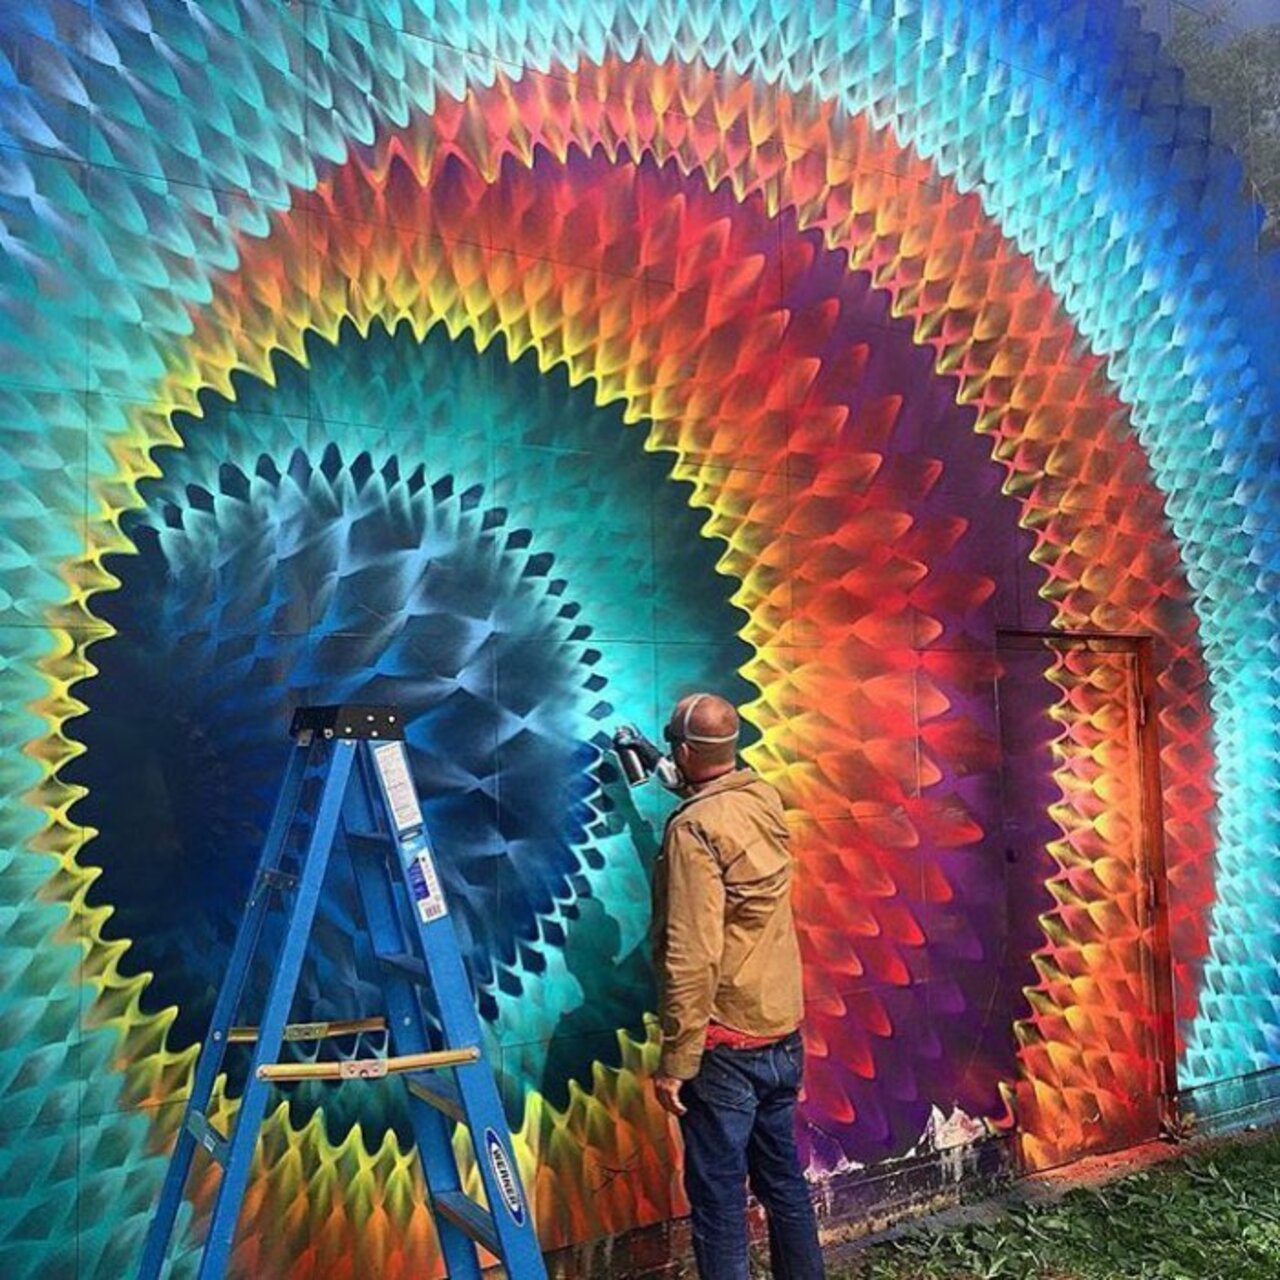 #StreetArt Rainbow – Creative Colours | Be ▲rtist - Be ▲rt https://beartistbeart.com/2016/06/23/streetart-rainbow-creative-colours/?utm_campaign=crowdfire&utm_content=crowdfire&utm_medium=social&utm_source=twitter https://t.co/HZTdSDbRqF